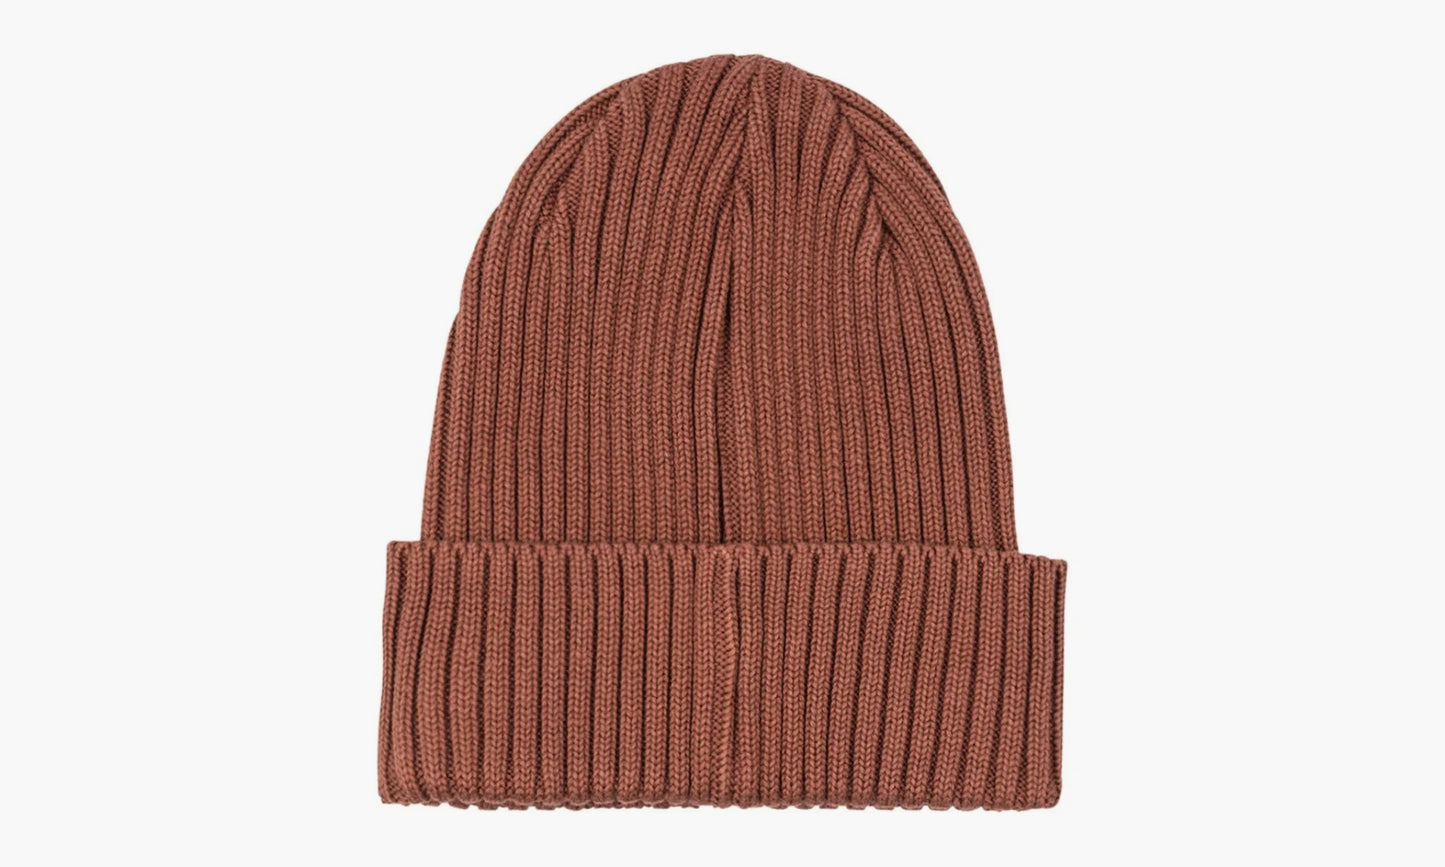 Supreme Overdyed Beanie «Brown» - SUP-SS22-784 | Grailshop